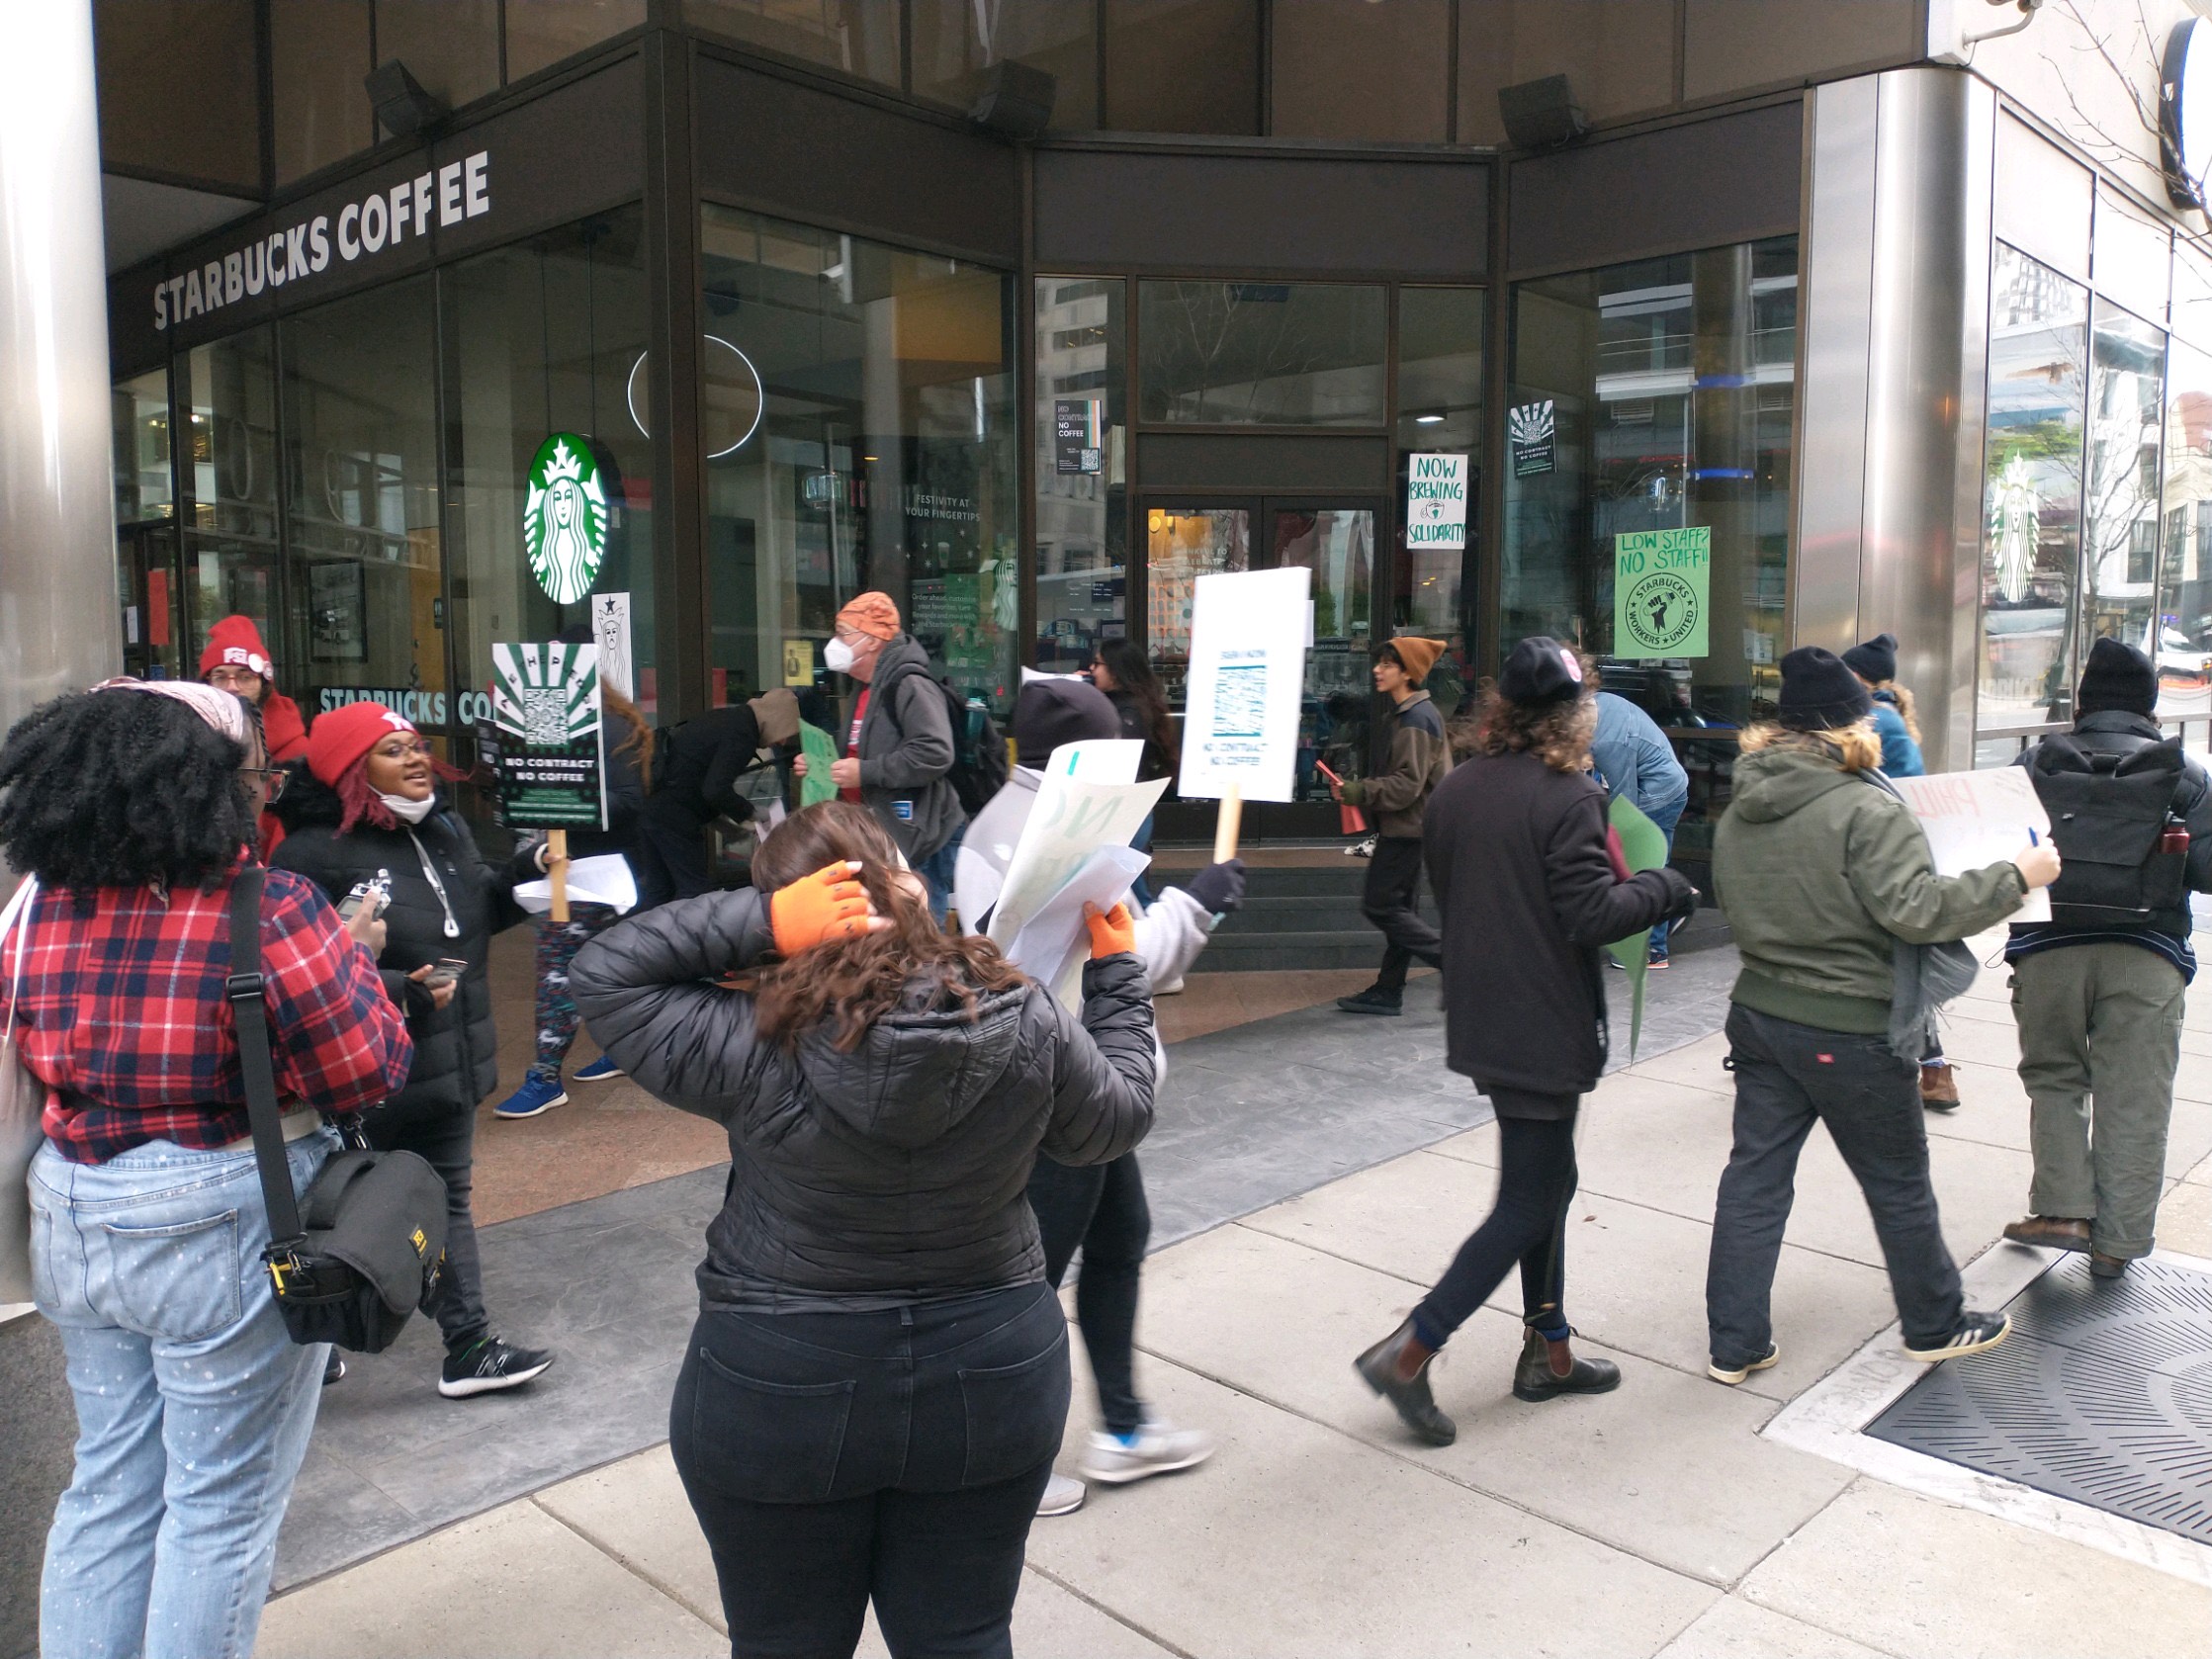 Starbucks workers hold picket signs and walk in a circle on the sidewalk in front of the entrance to the Starbucks on 20th and Market Street.